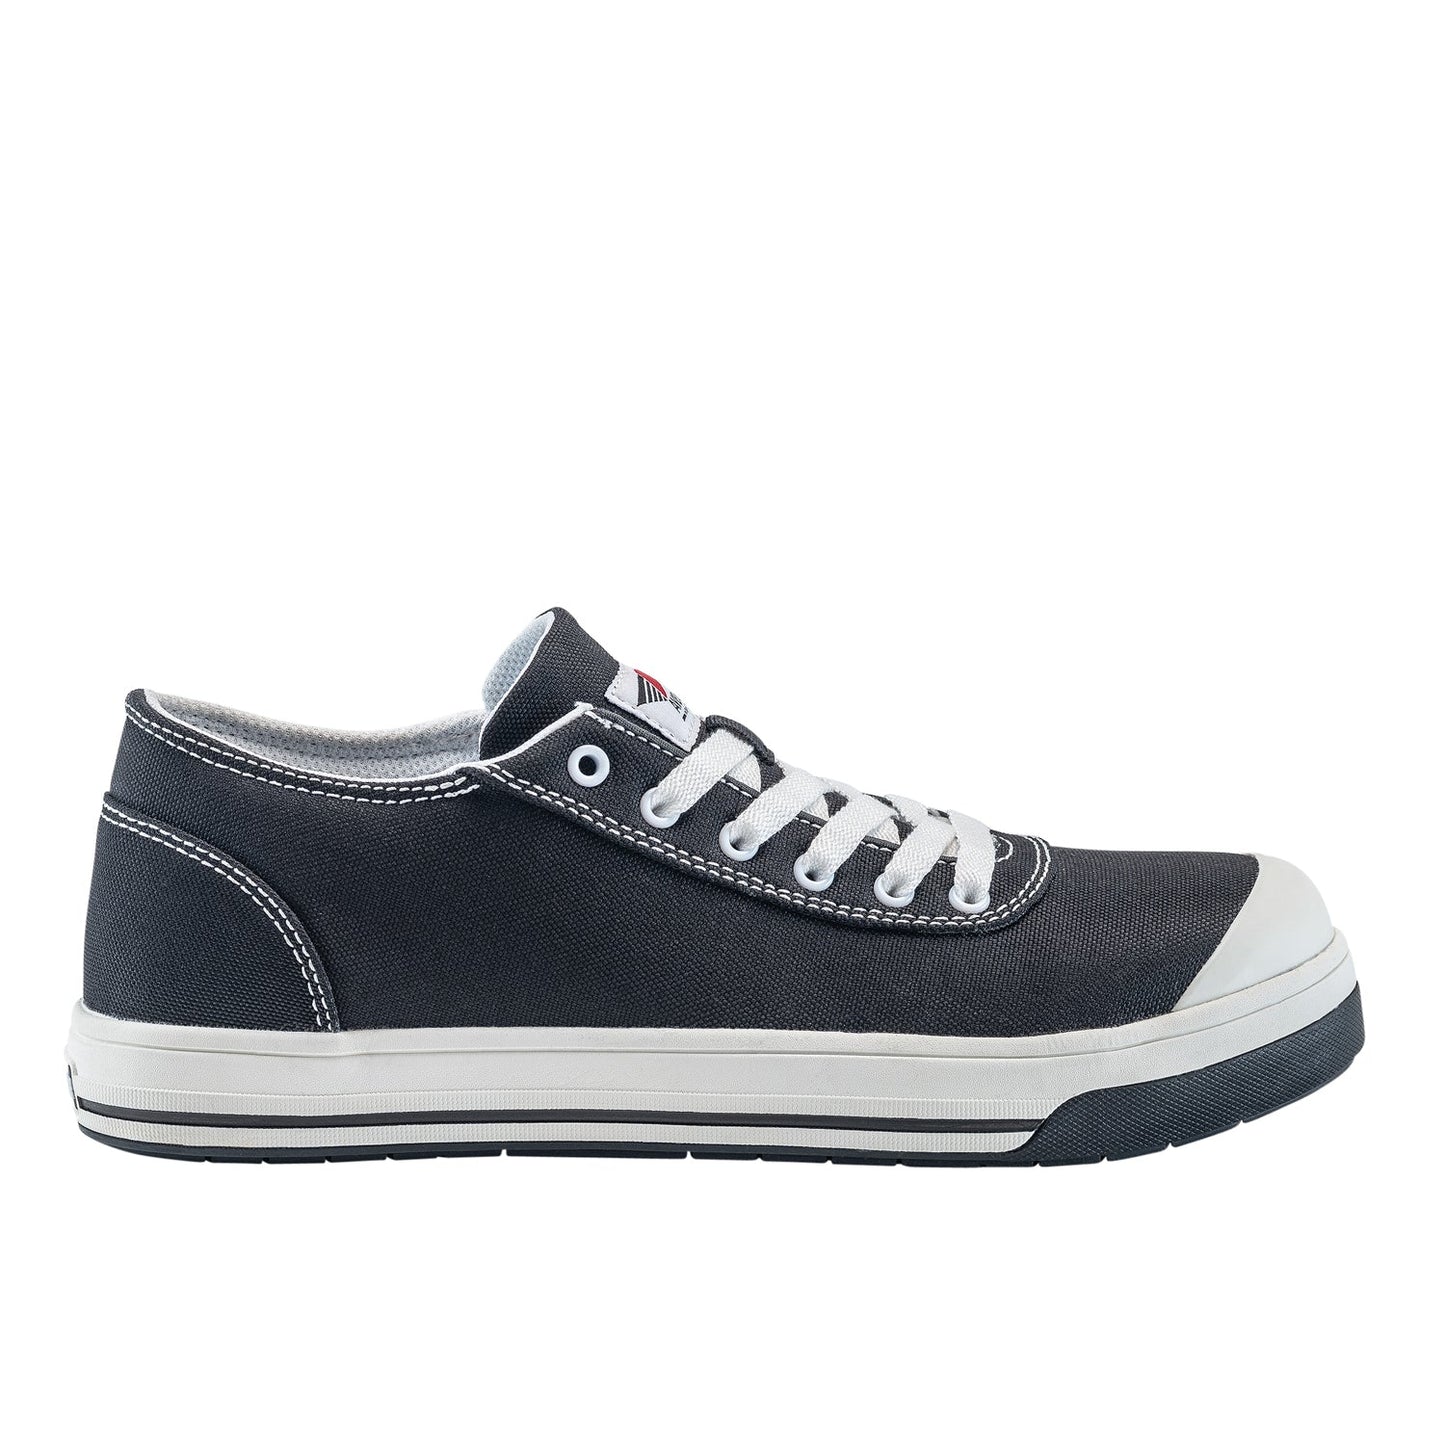 Blade A320 Safety Toe::Black/White